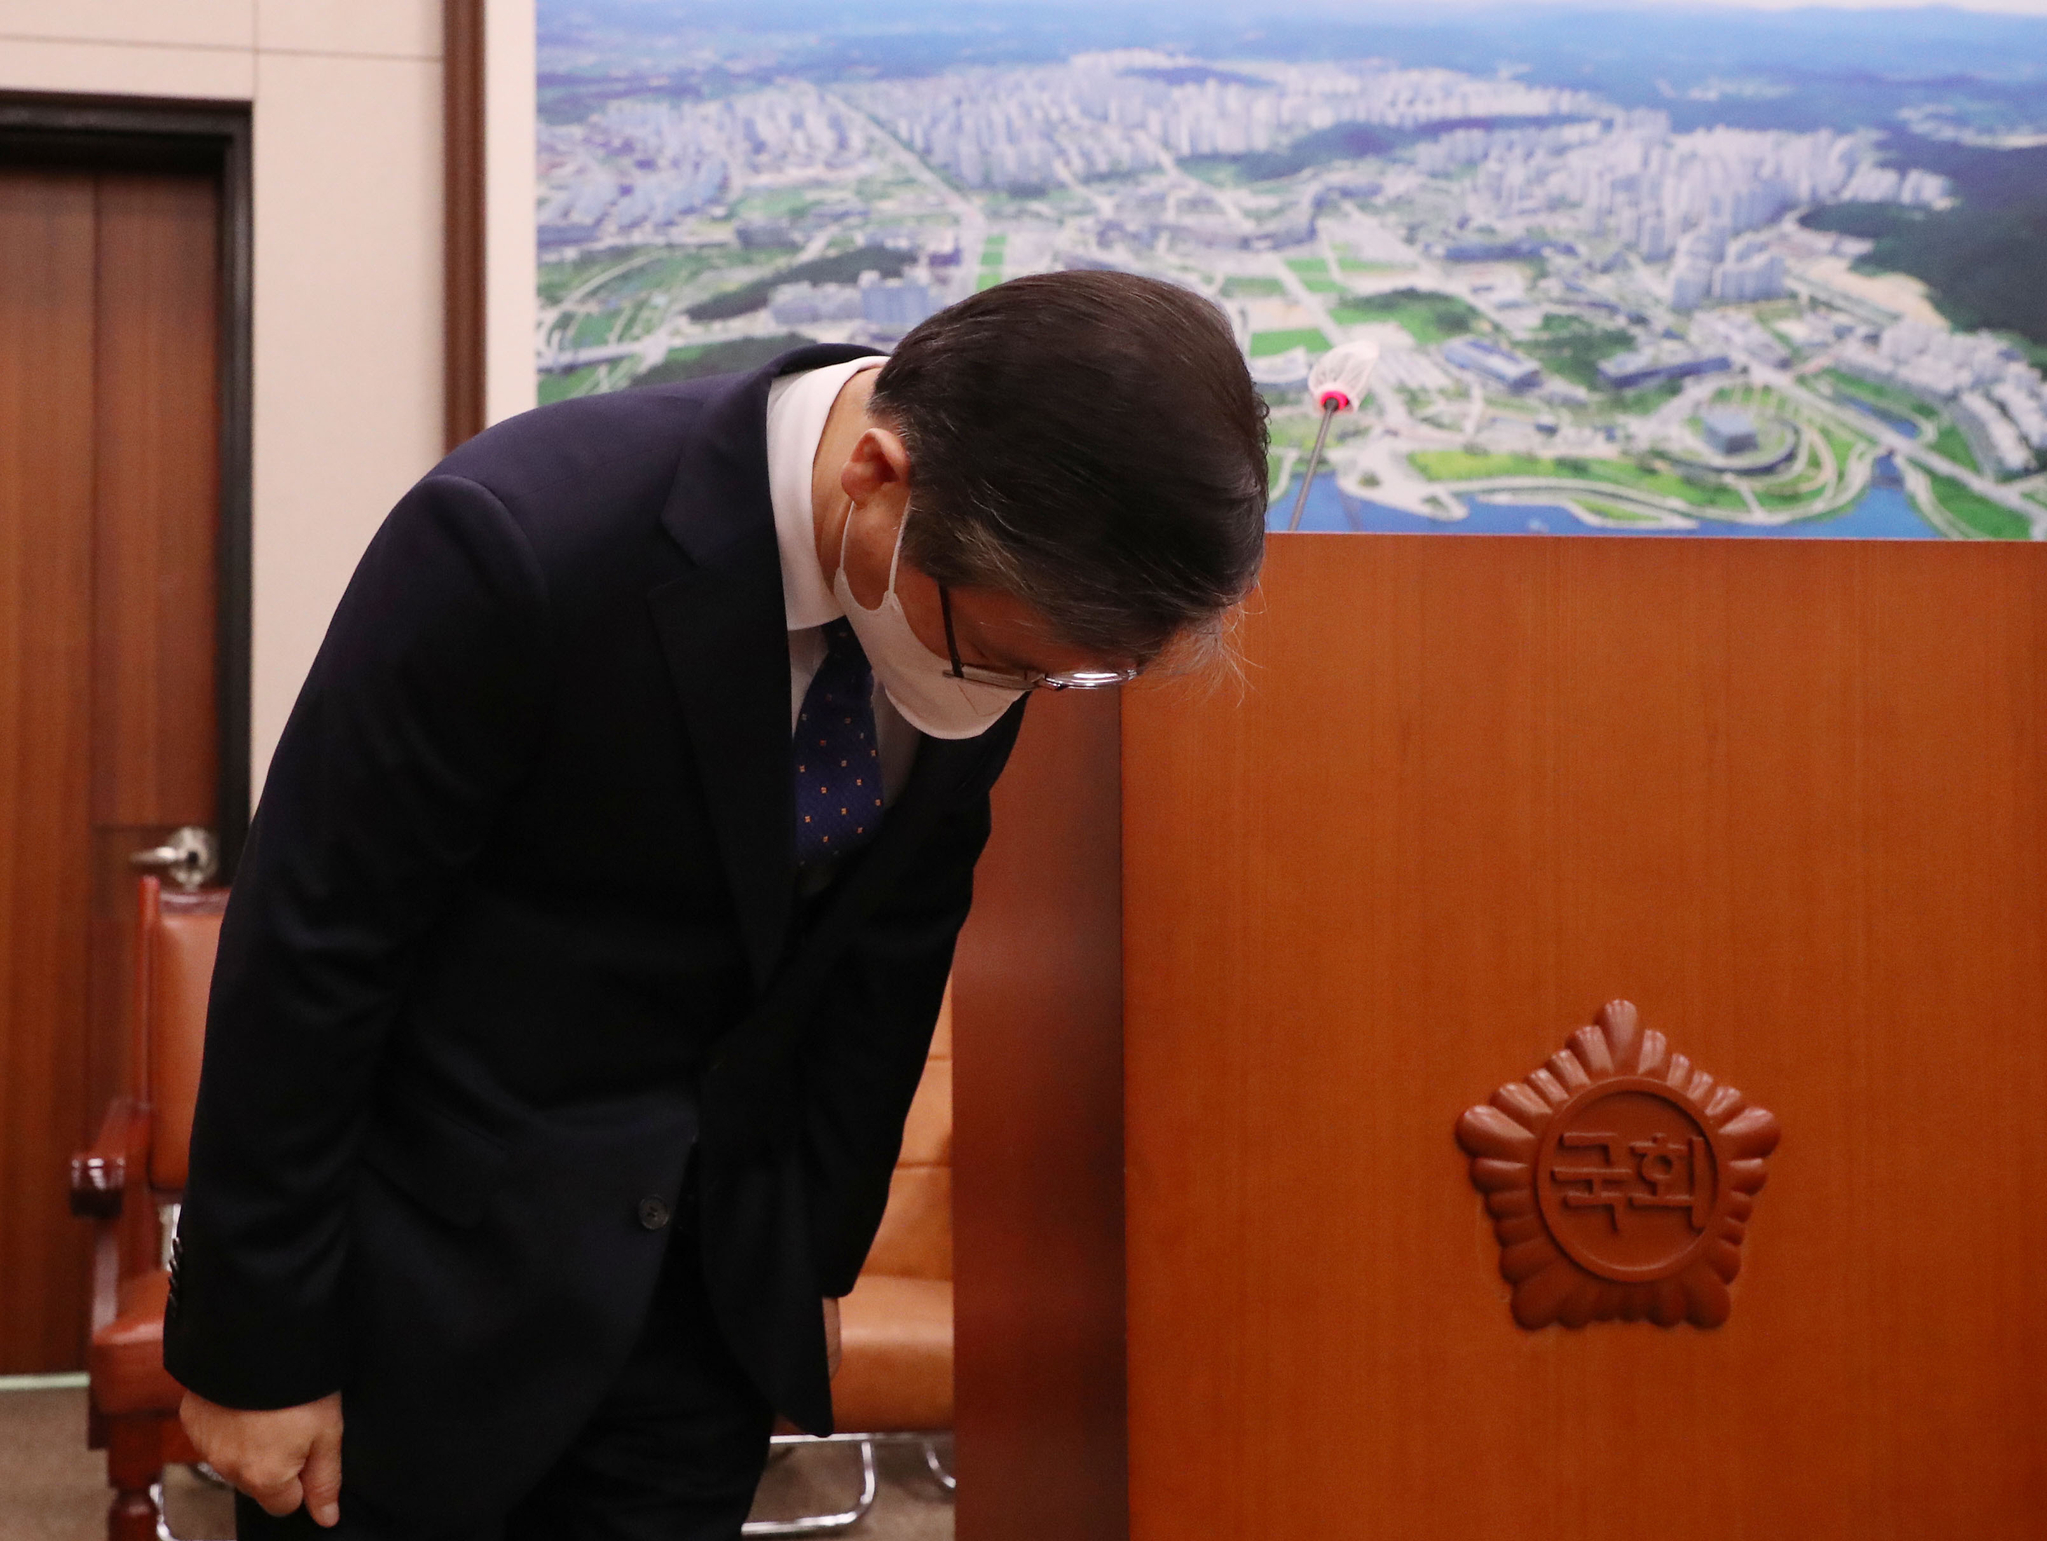 Hearing over 14 hours…  Byun Chang-Hum apologizes more than 10 times for the’last controversy’